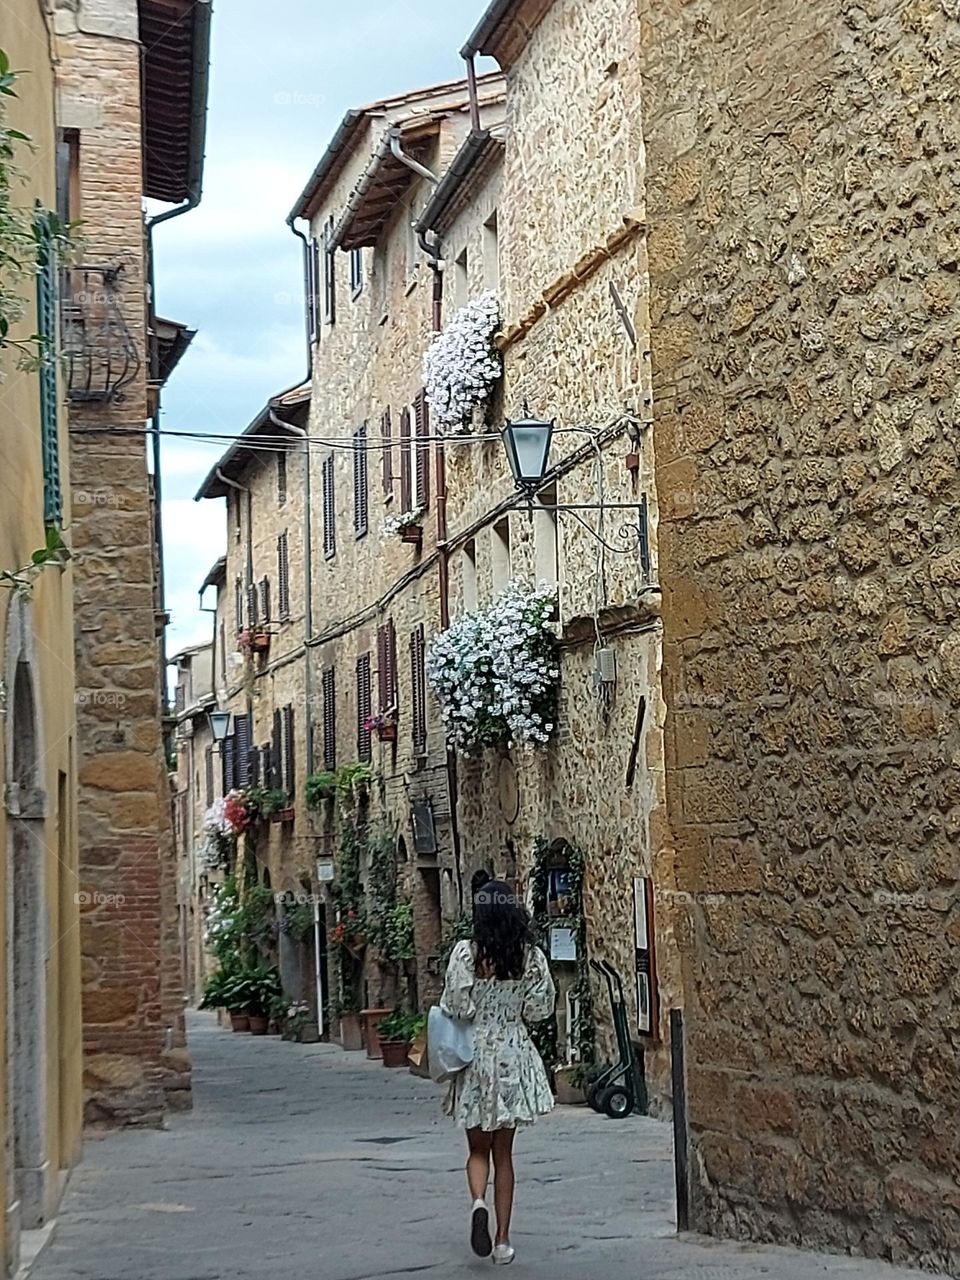 summer in Italy, old village and girl